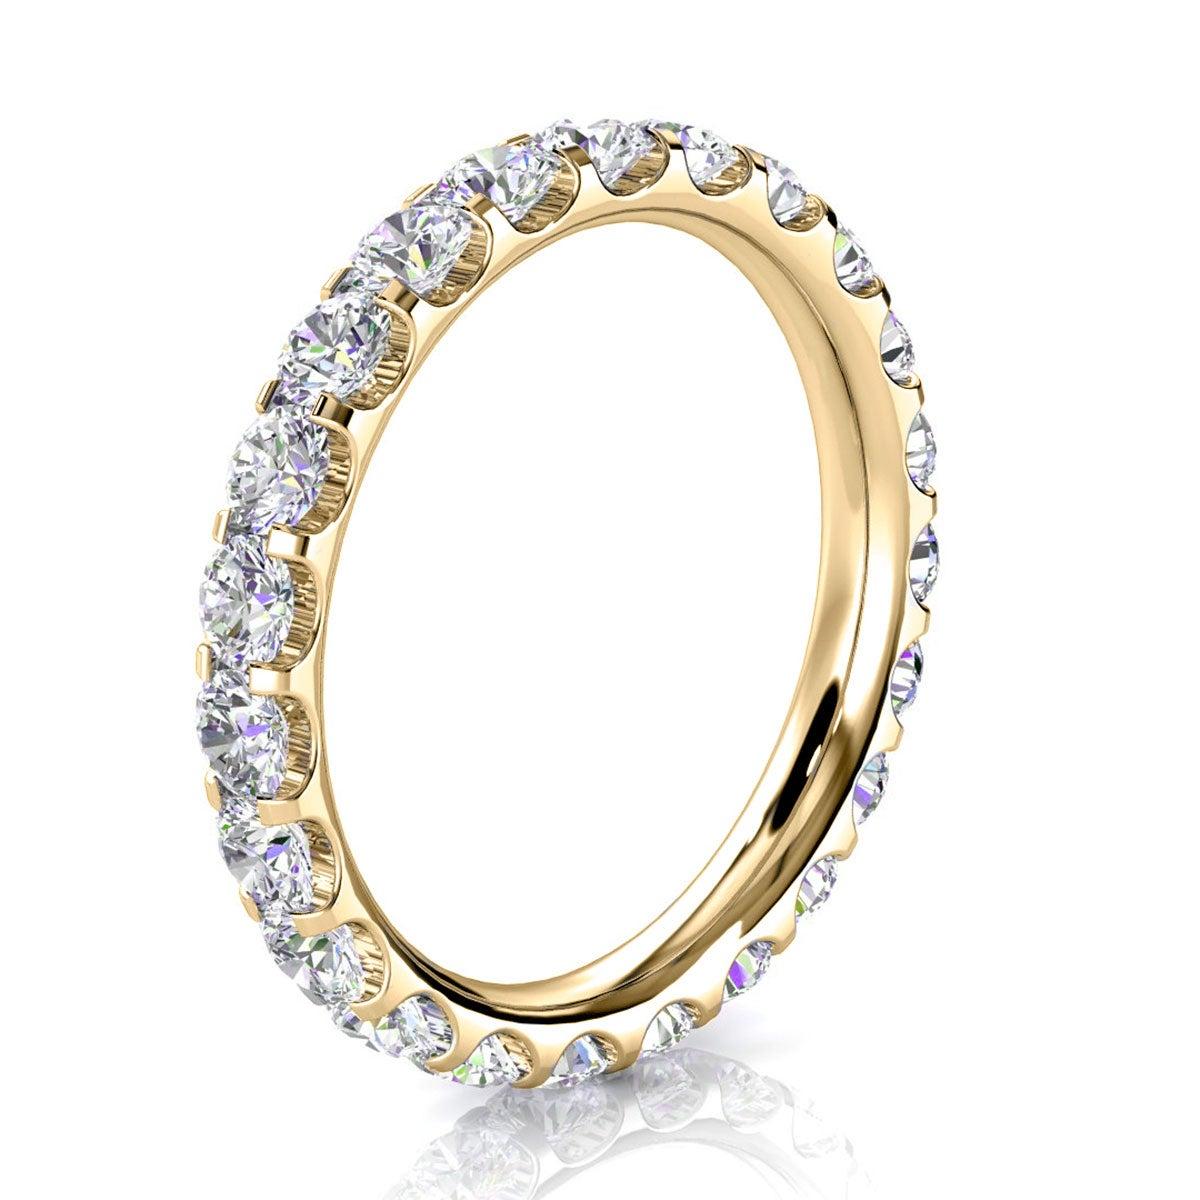 For Sale:  14k Yellow Gold Viola Eternity Micro-Prong Diamond Ring '1 1/2 Ct. Tw' 2